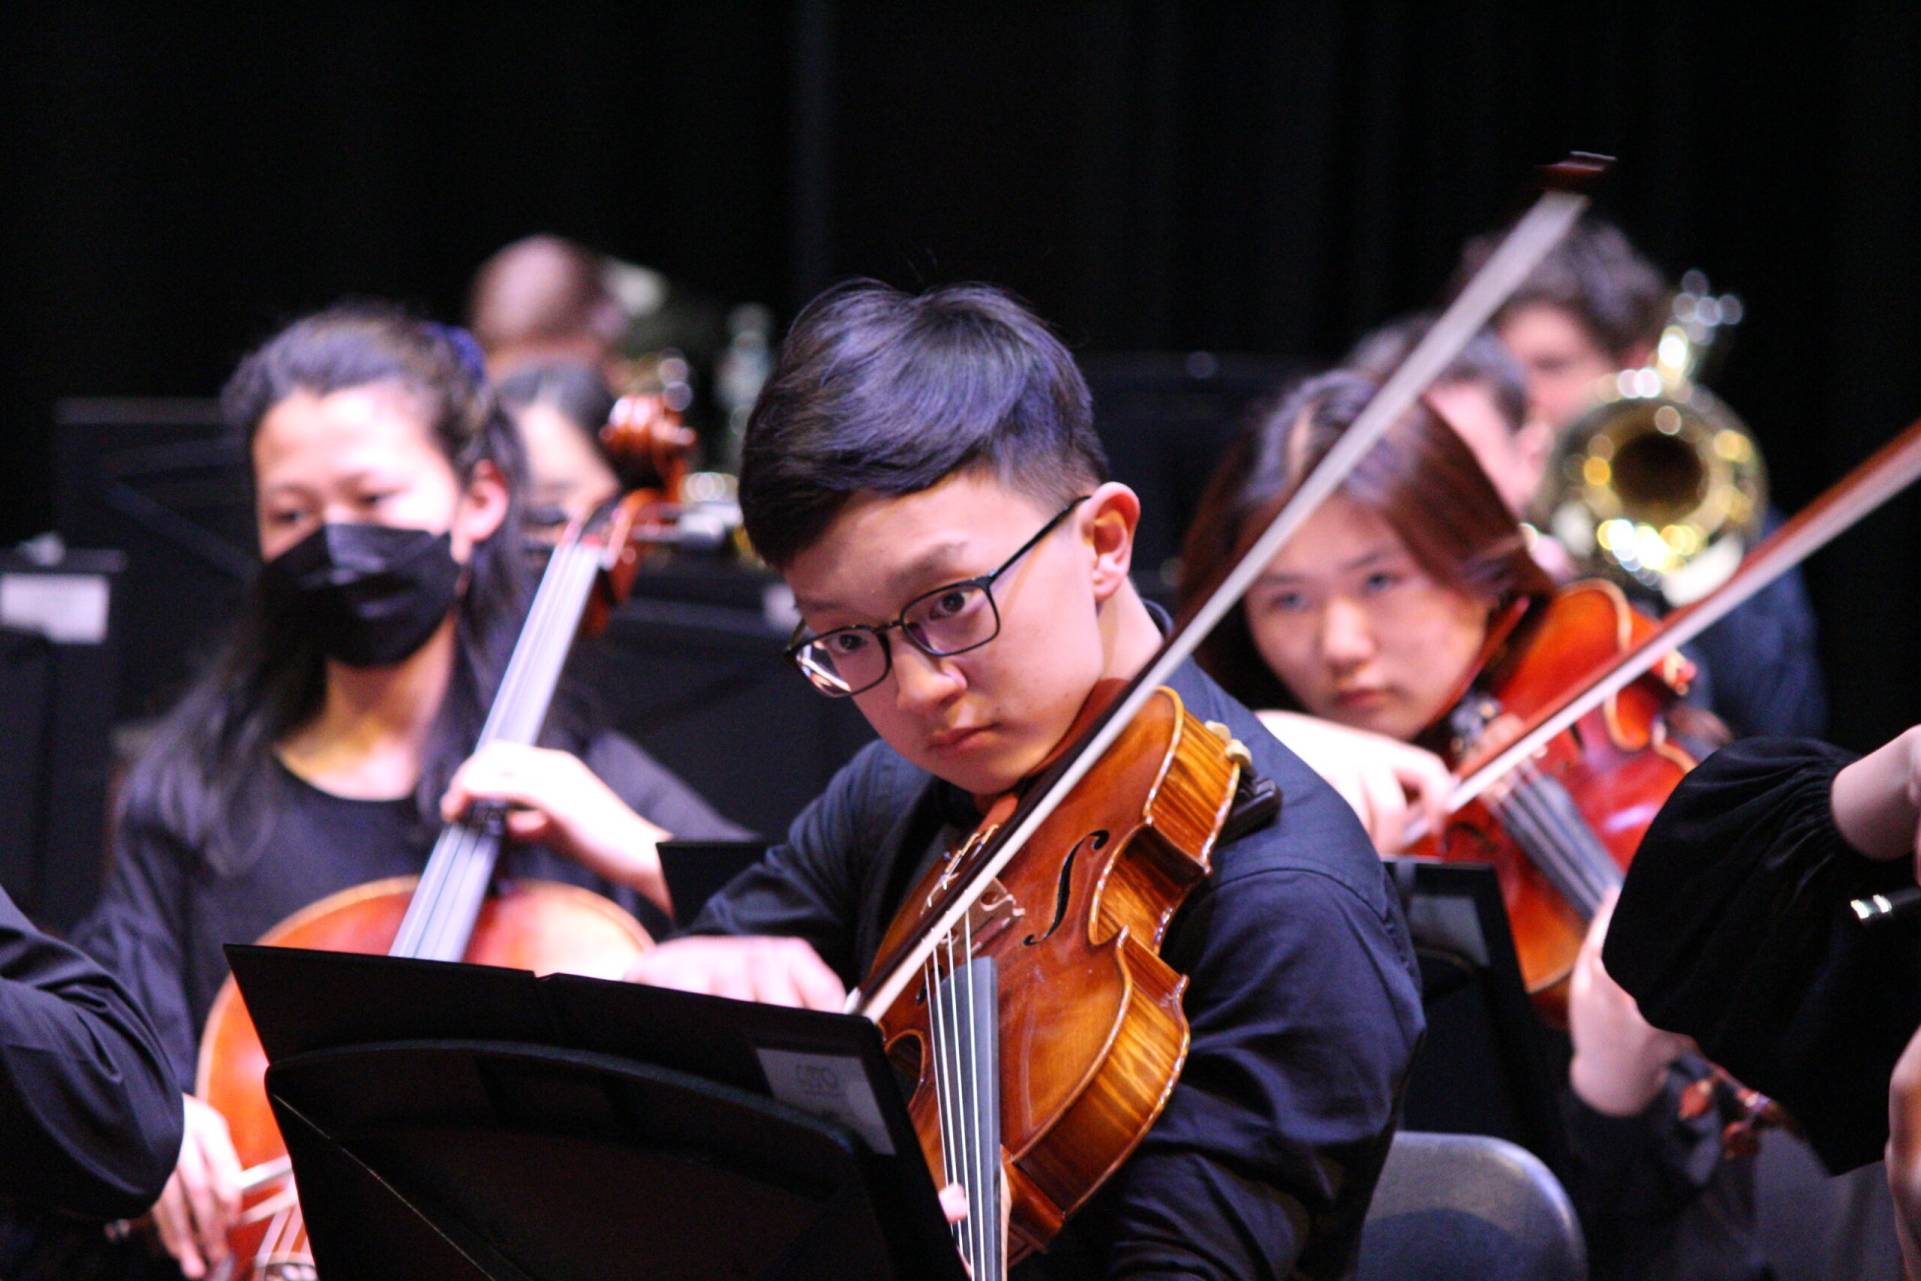 Young violinist performing with other musicians playing in the background out of focus.